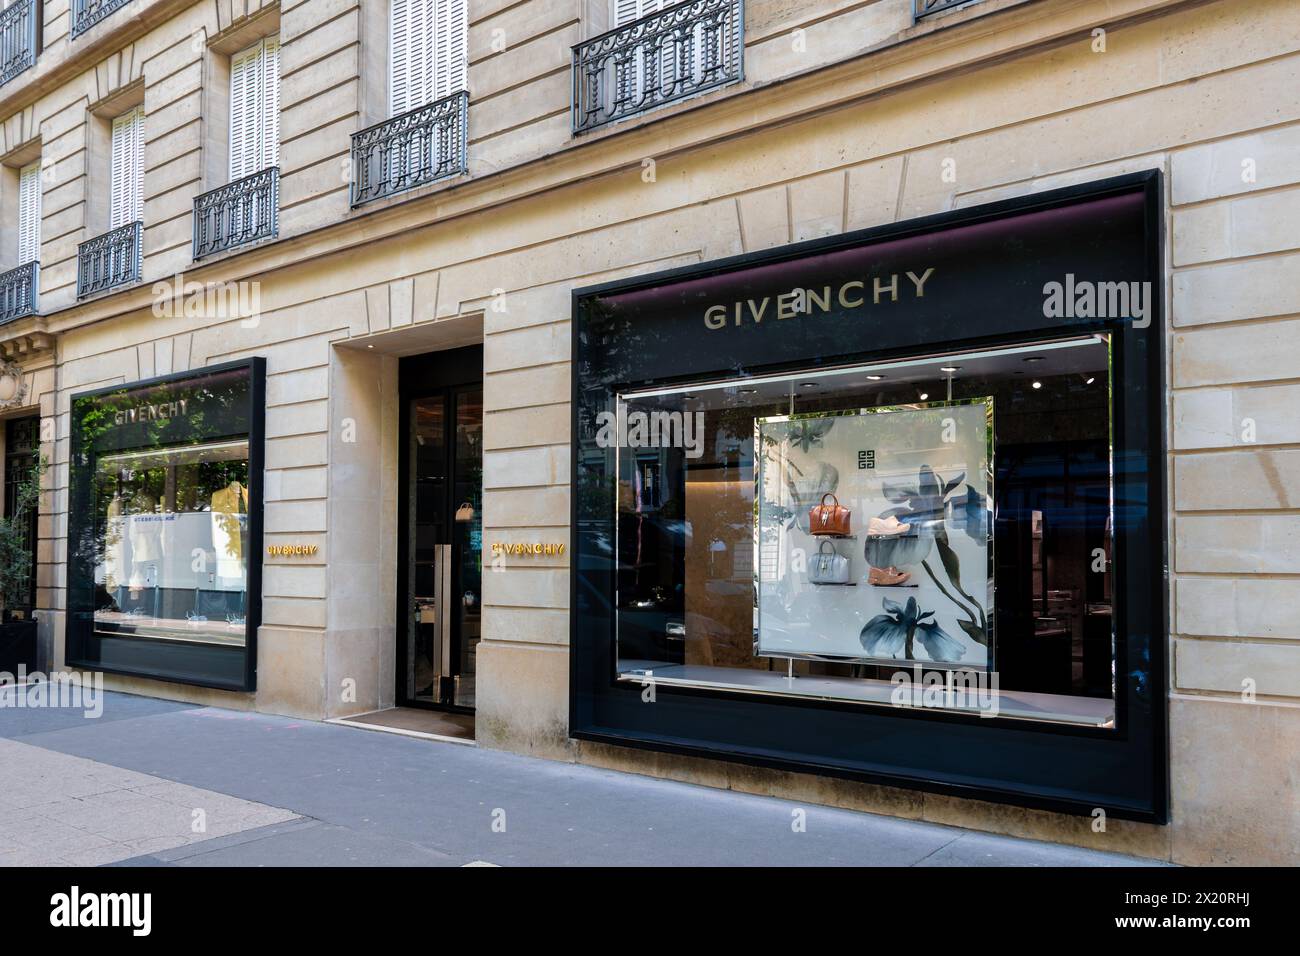 Exterior view of a Givenchy boutique in the Champs-Elysées district, Paris. Givenchy is a French fashion and luxury brand belonging to the LVMH group Stock Photo